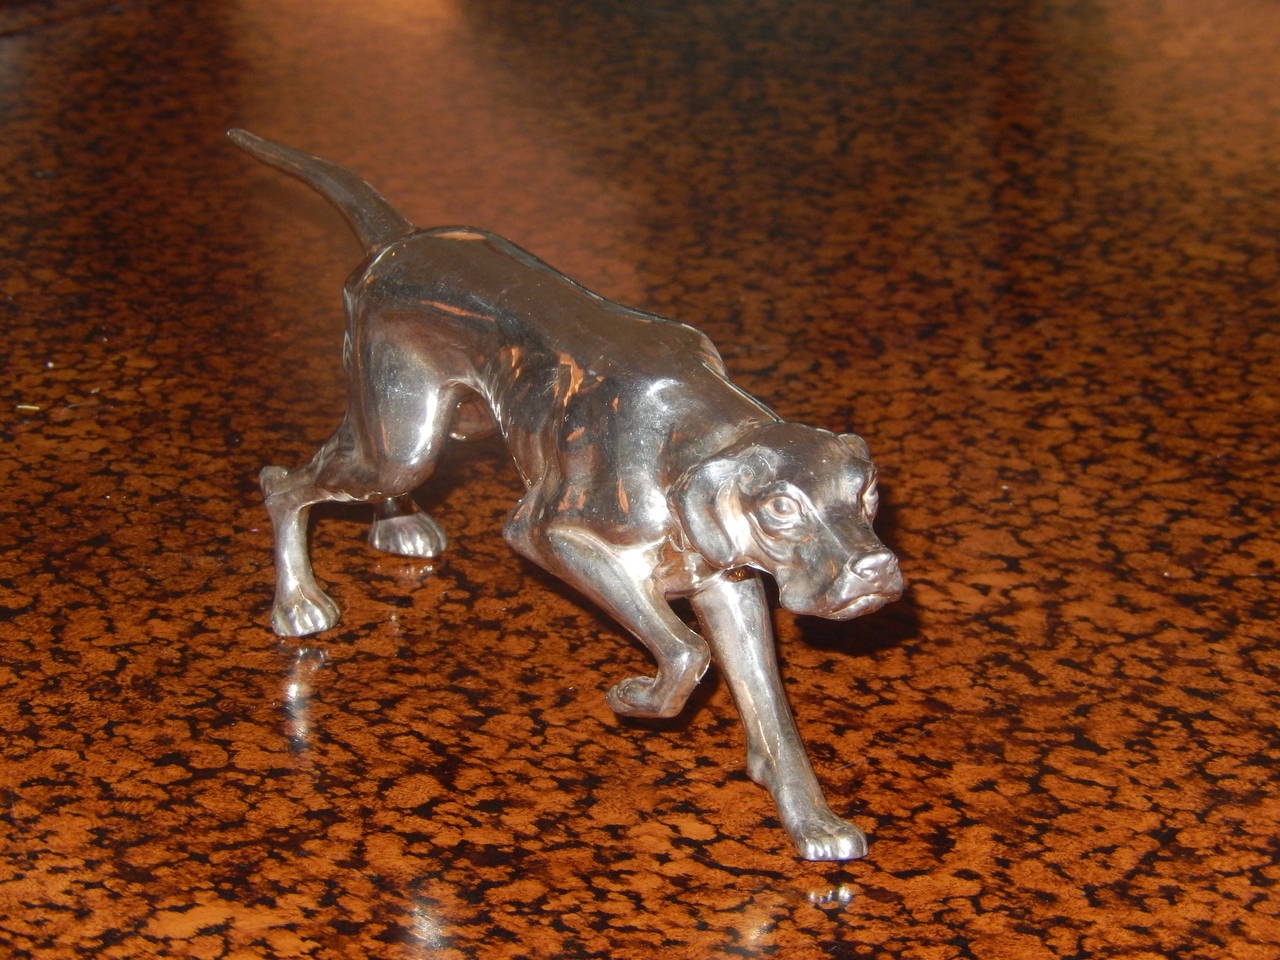 A beautifully executed Art Deco sculpture of a Red Setter in sterling silver 925. The Lenght is 8 inches, the width is 3 inches and the height is 4 inches.